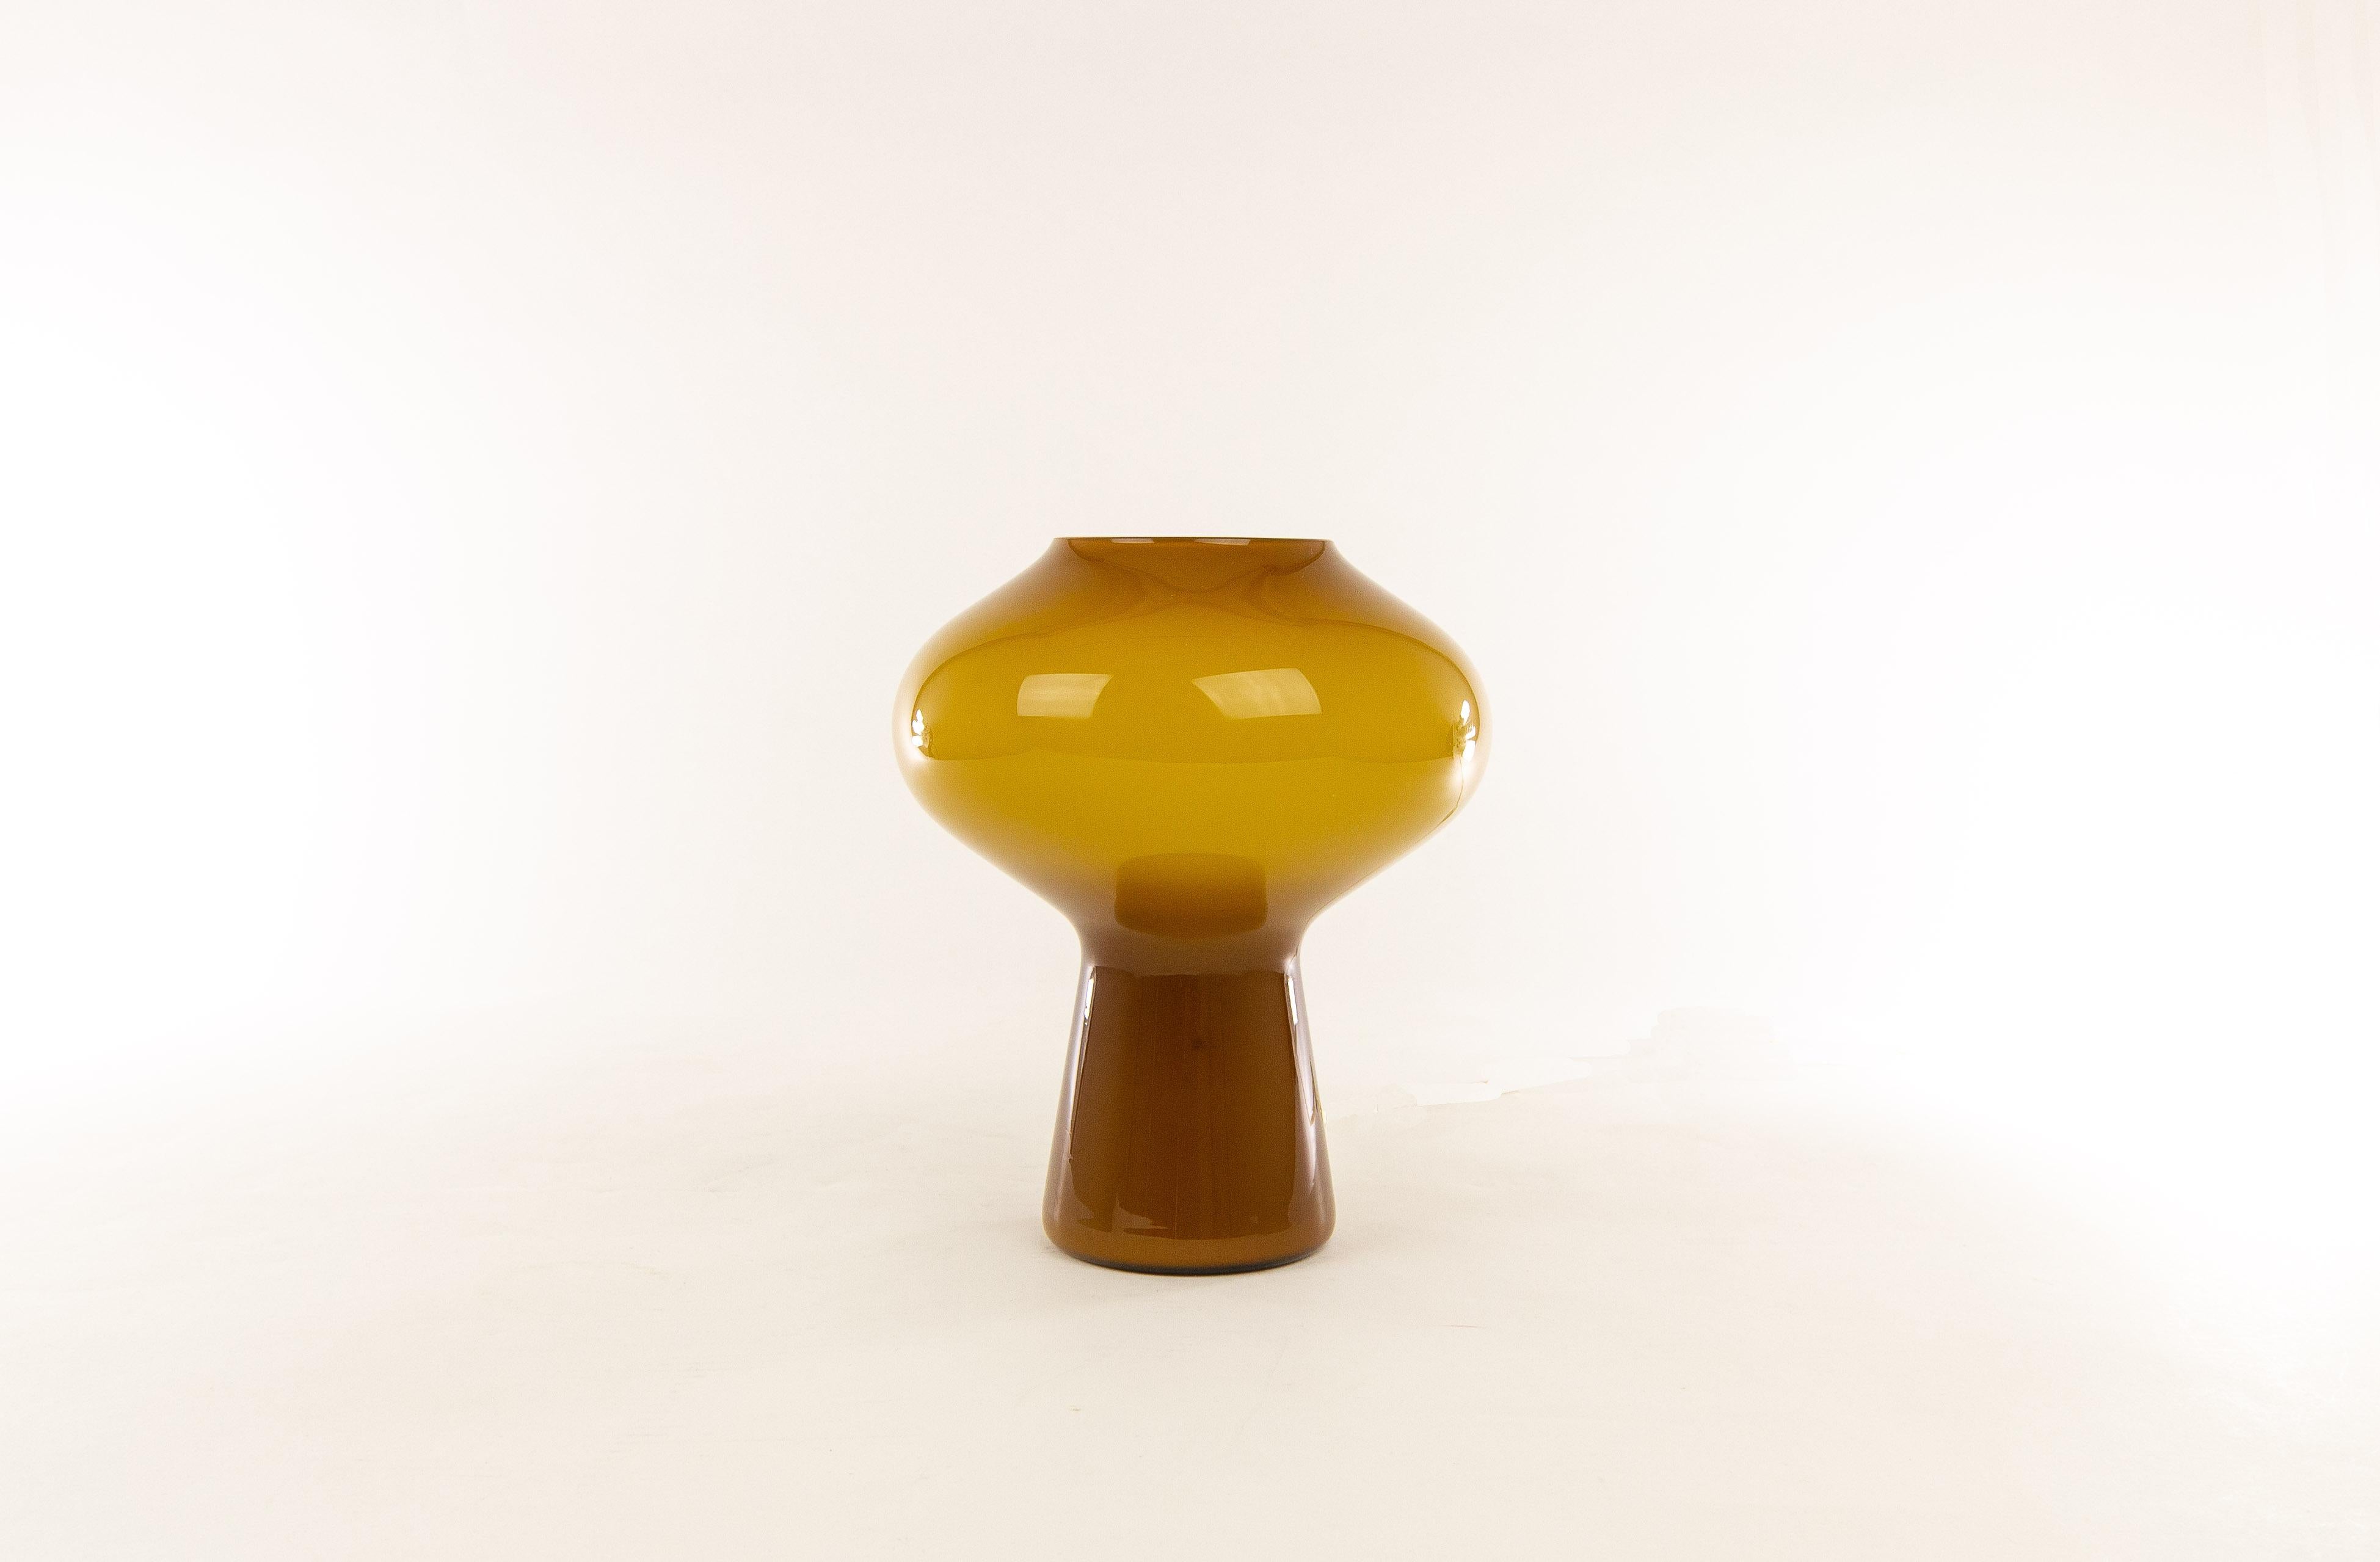 A hand-blown amber coloured glass Fungo table lamp designed by Massimo Vignelli for Murano glass specialist Venini. Fungo was the first joint project of Massimo Vignelli and Paolo Venini. 

Fungo was made in various sizes: this is a medium high